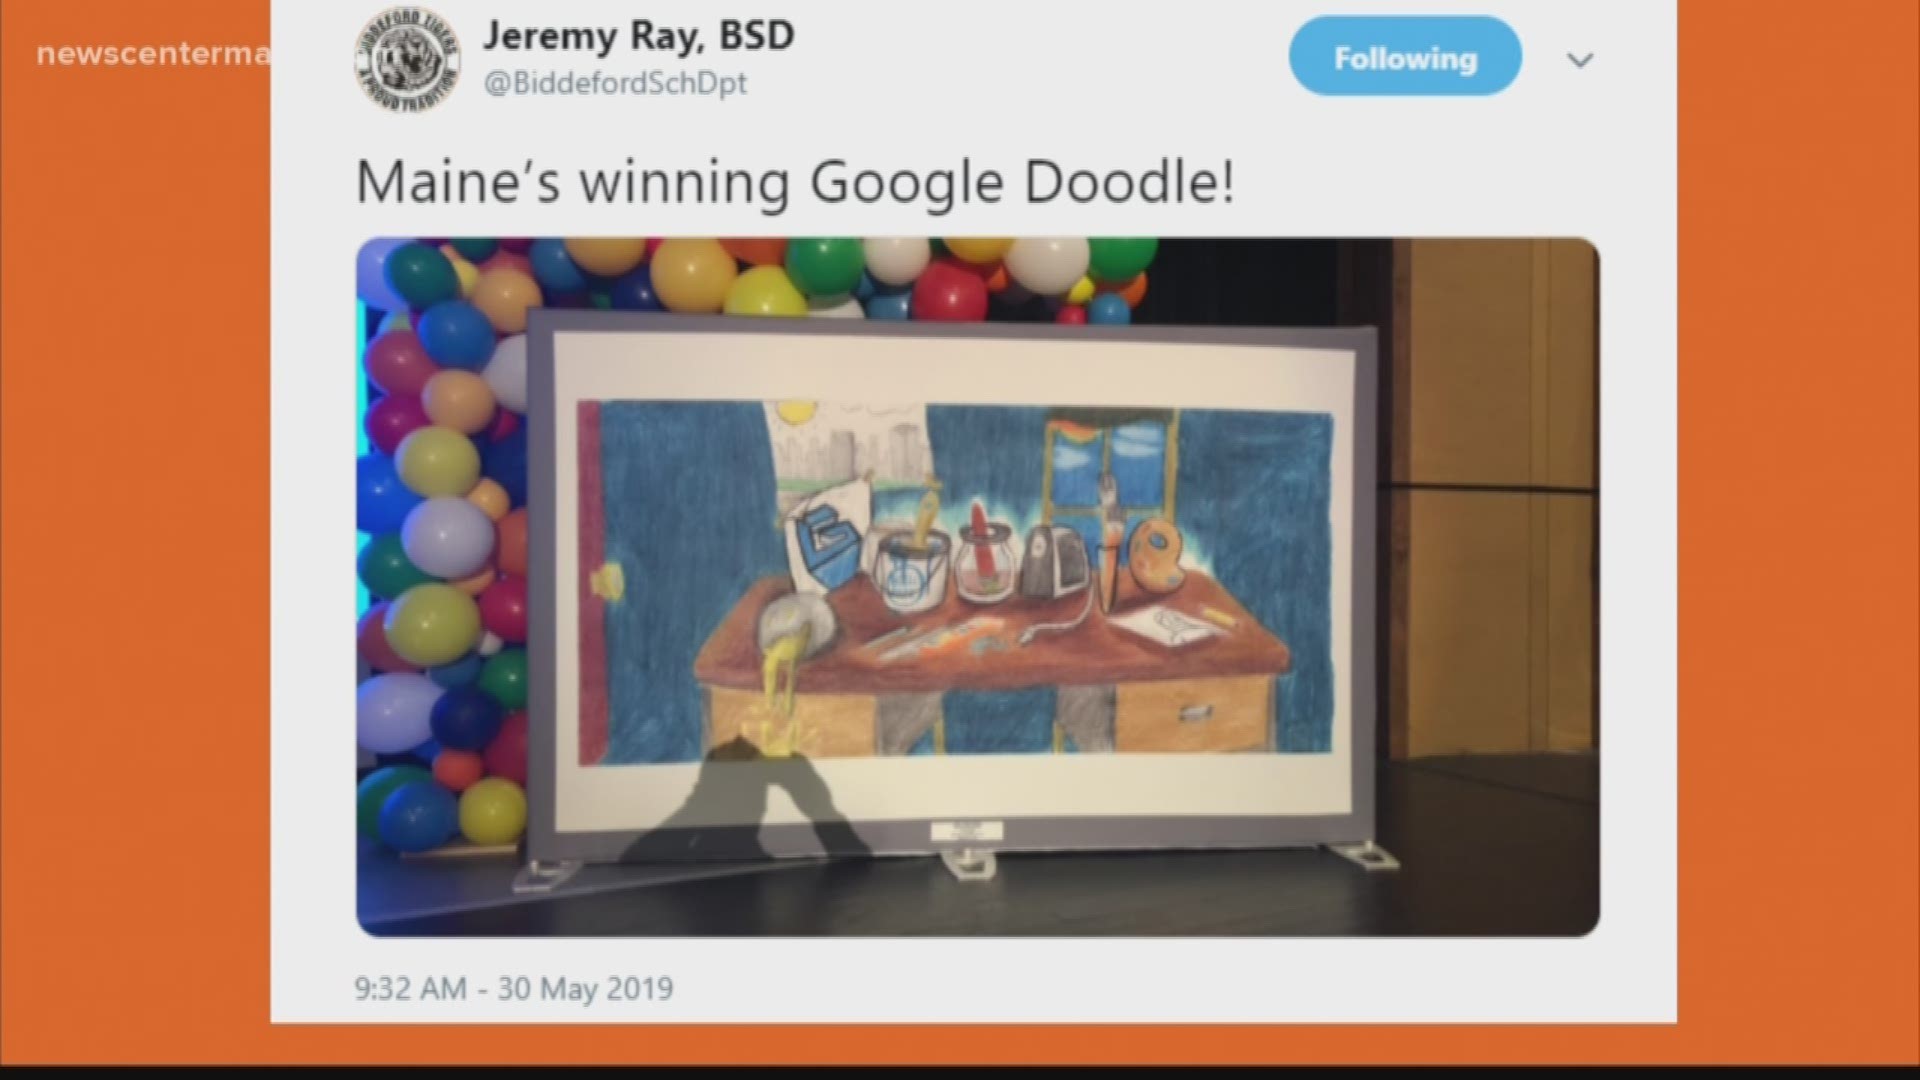 John Gatchalian, a 7th grader from Biddeford Middle School, is the Maine winner of this year's 'Doodle for Google' contest.